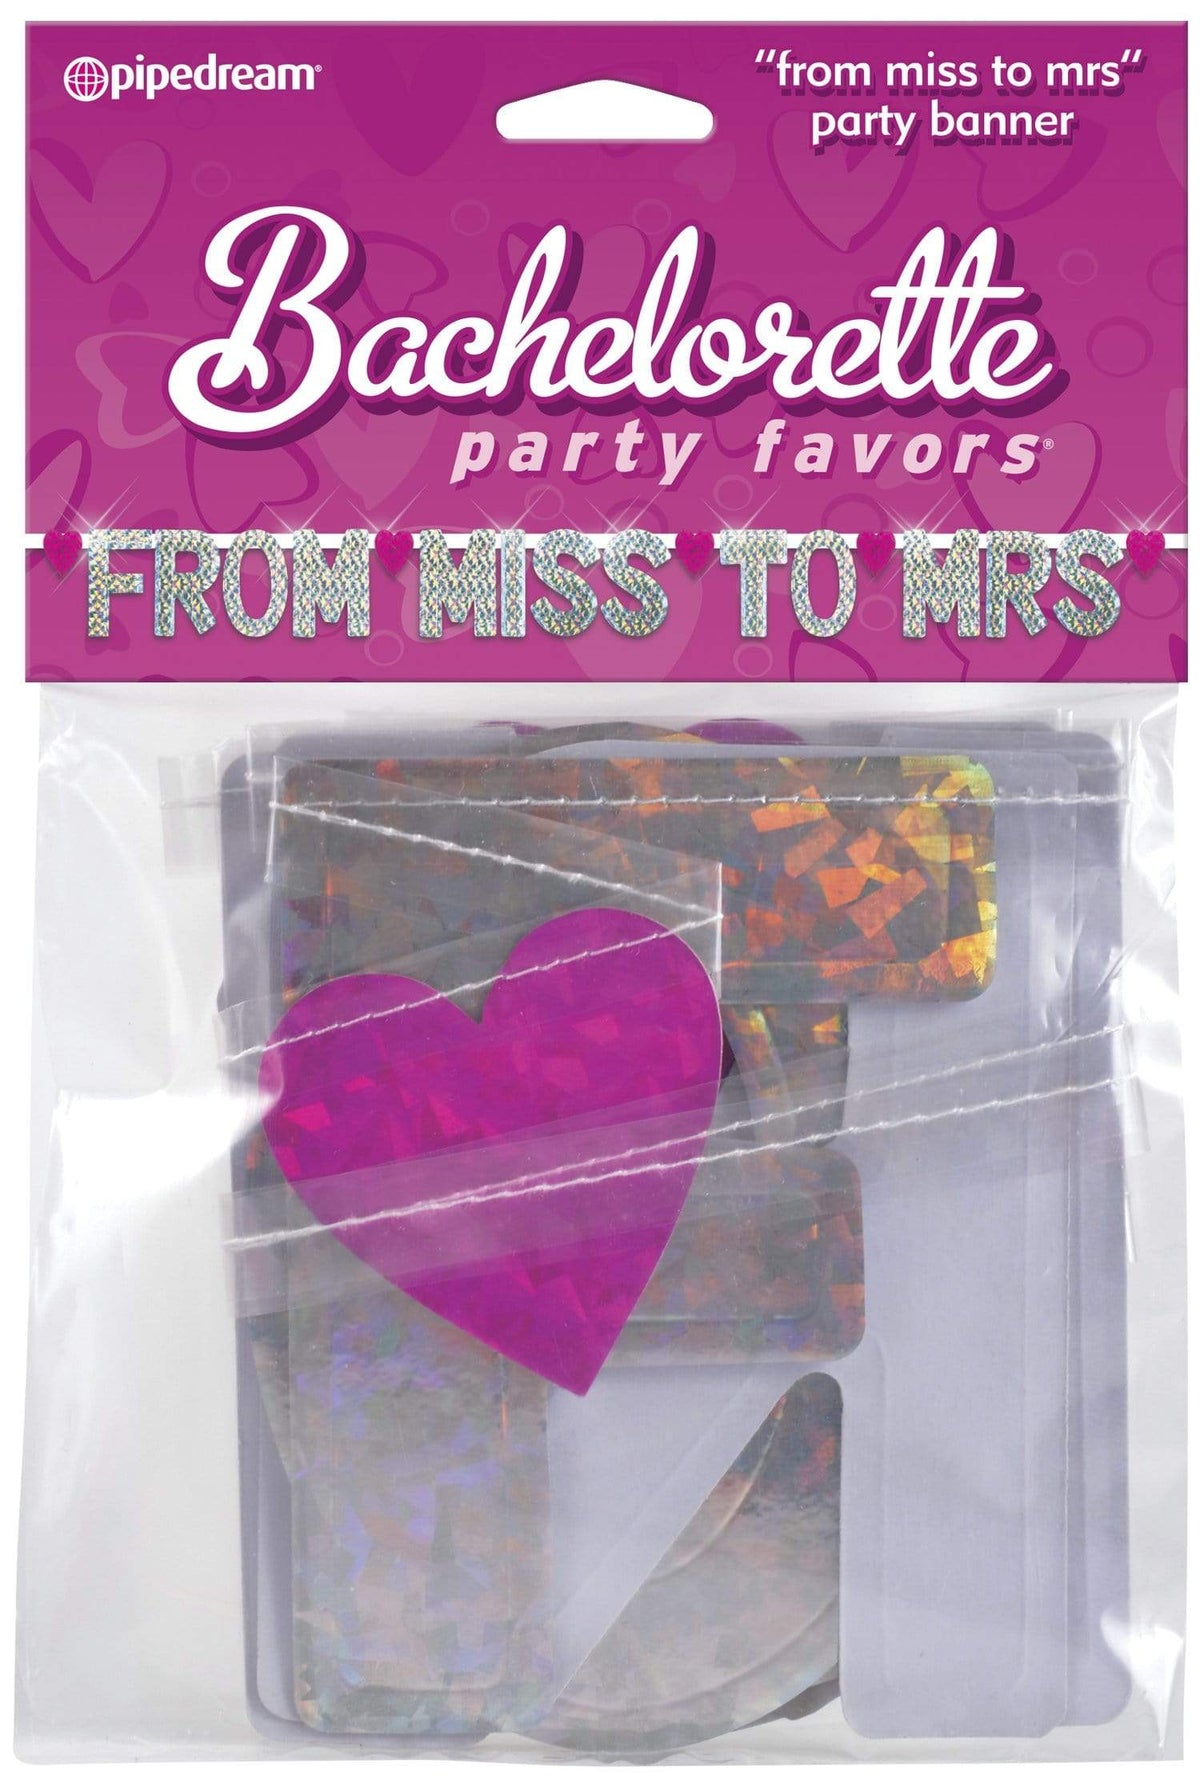 bachelorette party favors from miss to mrs banner